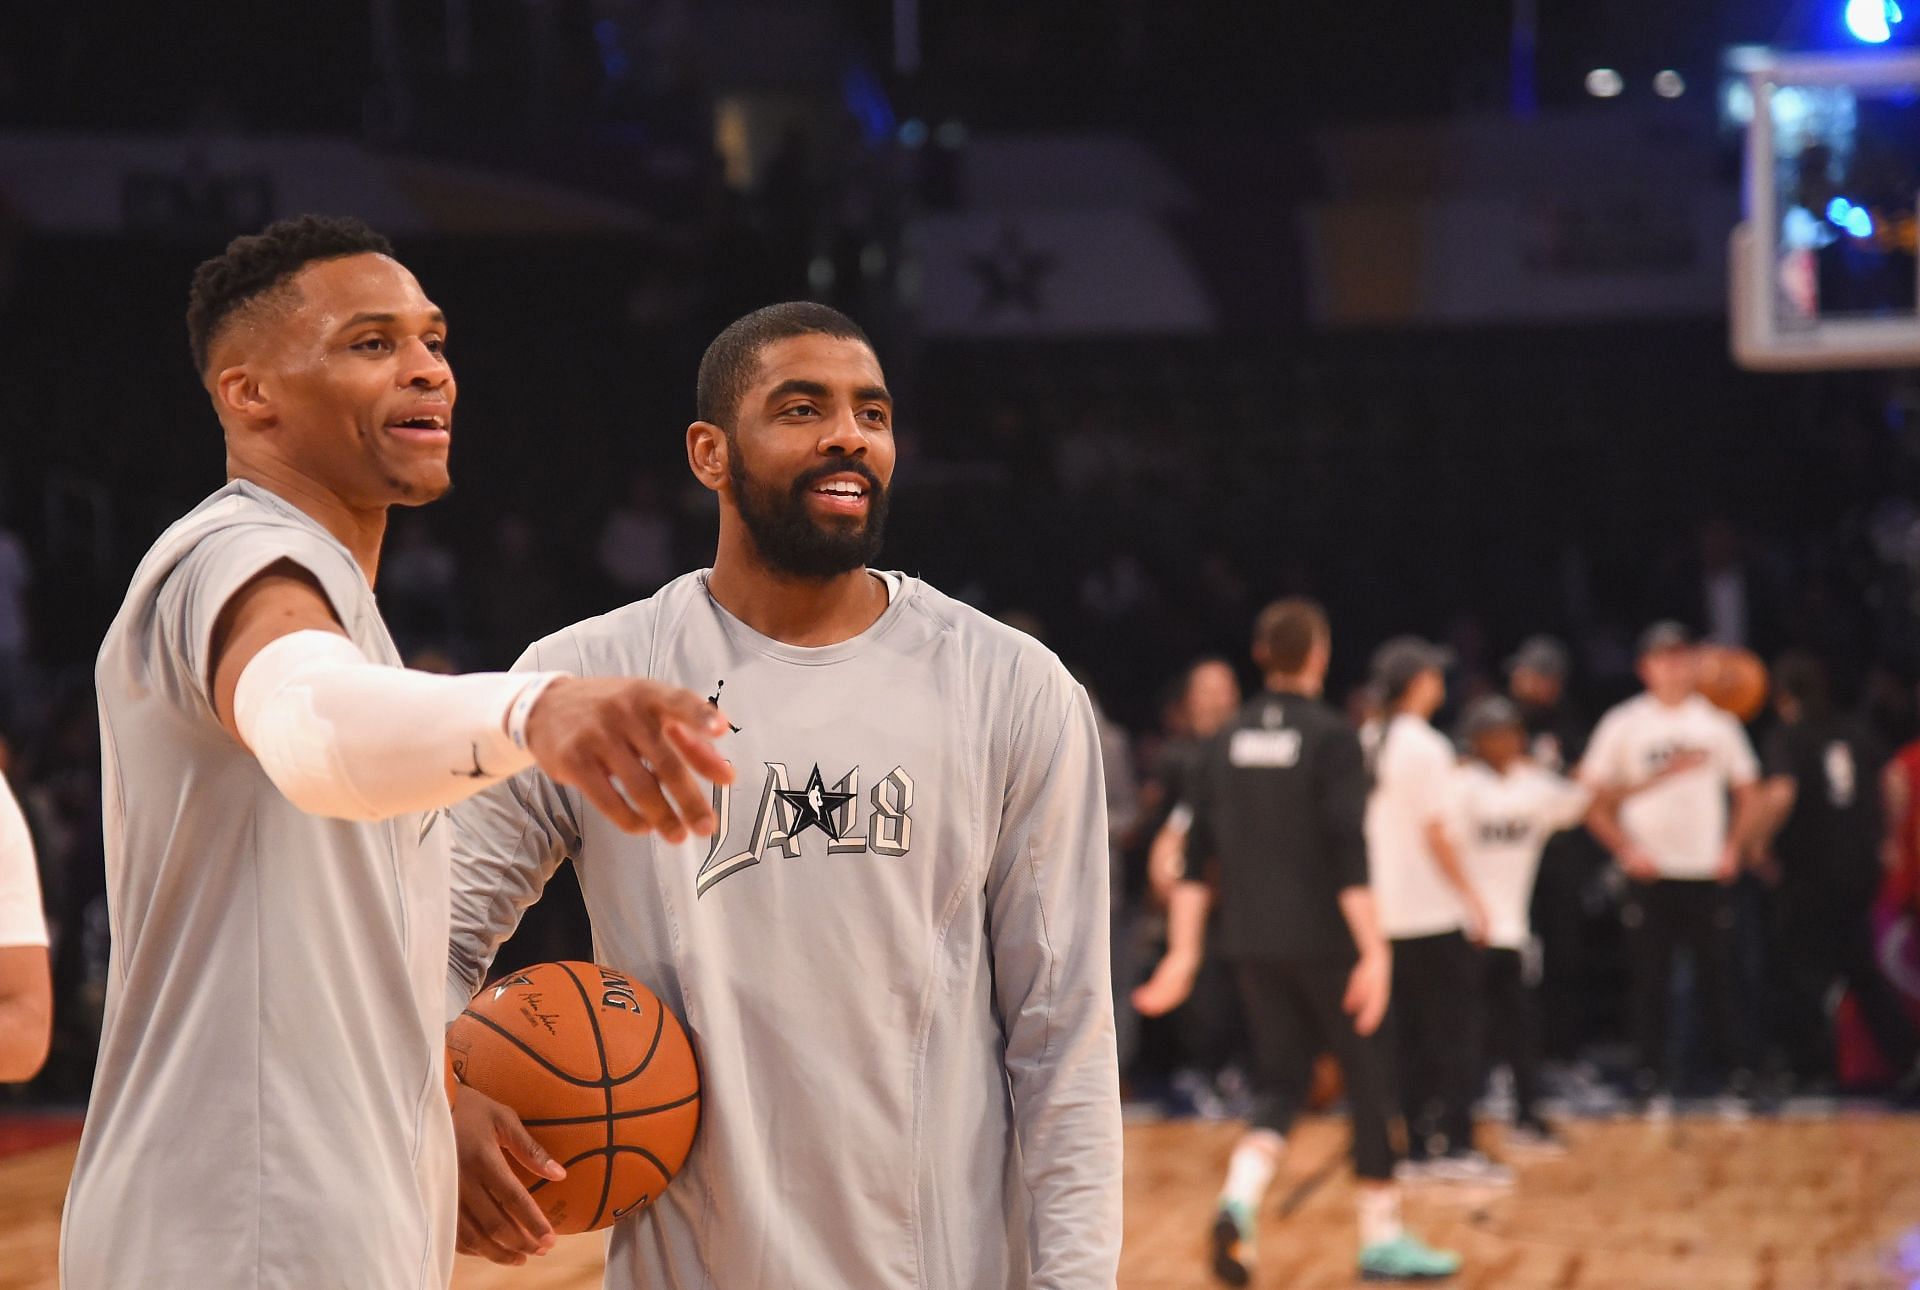 Kyrie Irving could be traded for Russell Westbrook. [Image Credit: Getty Images]